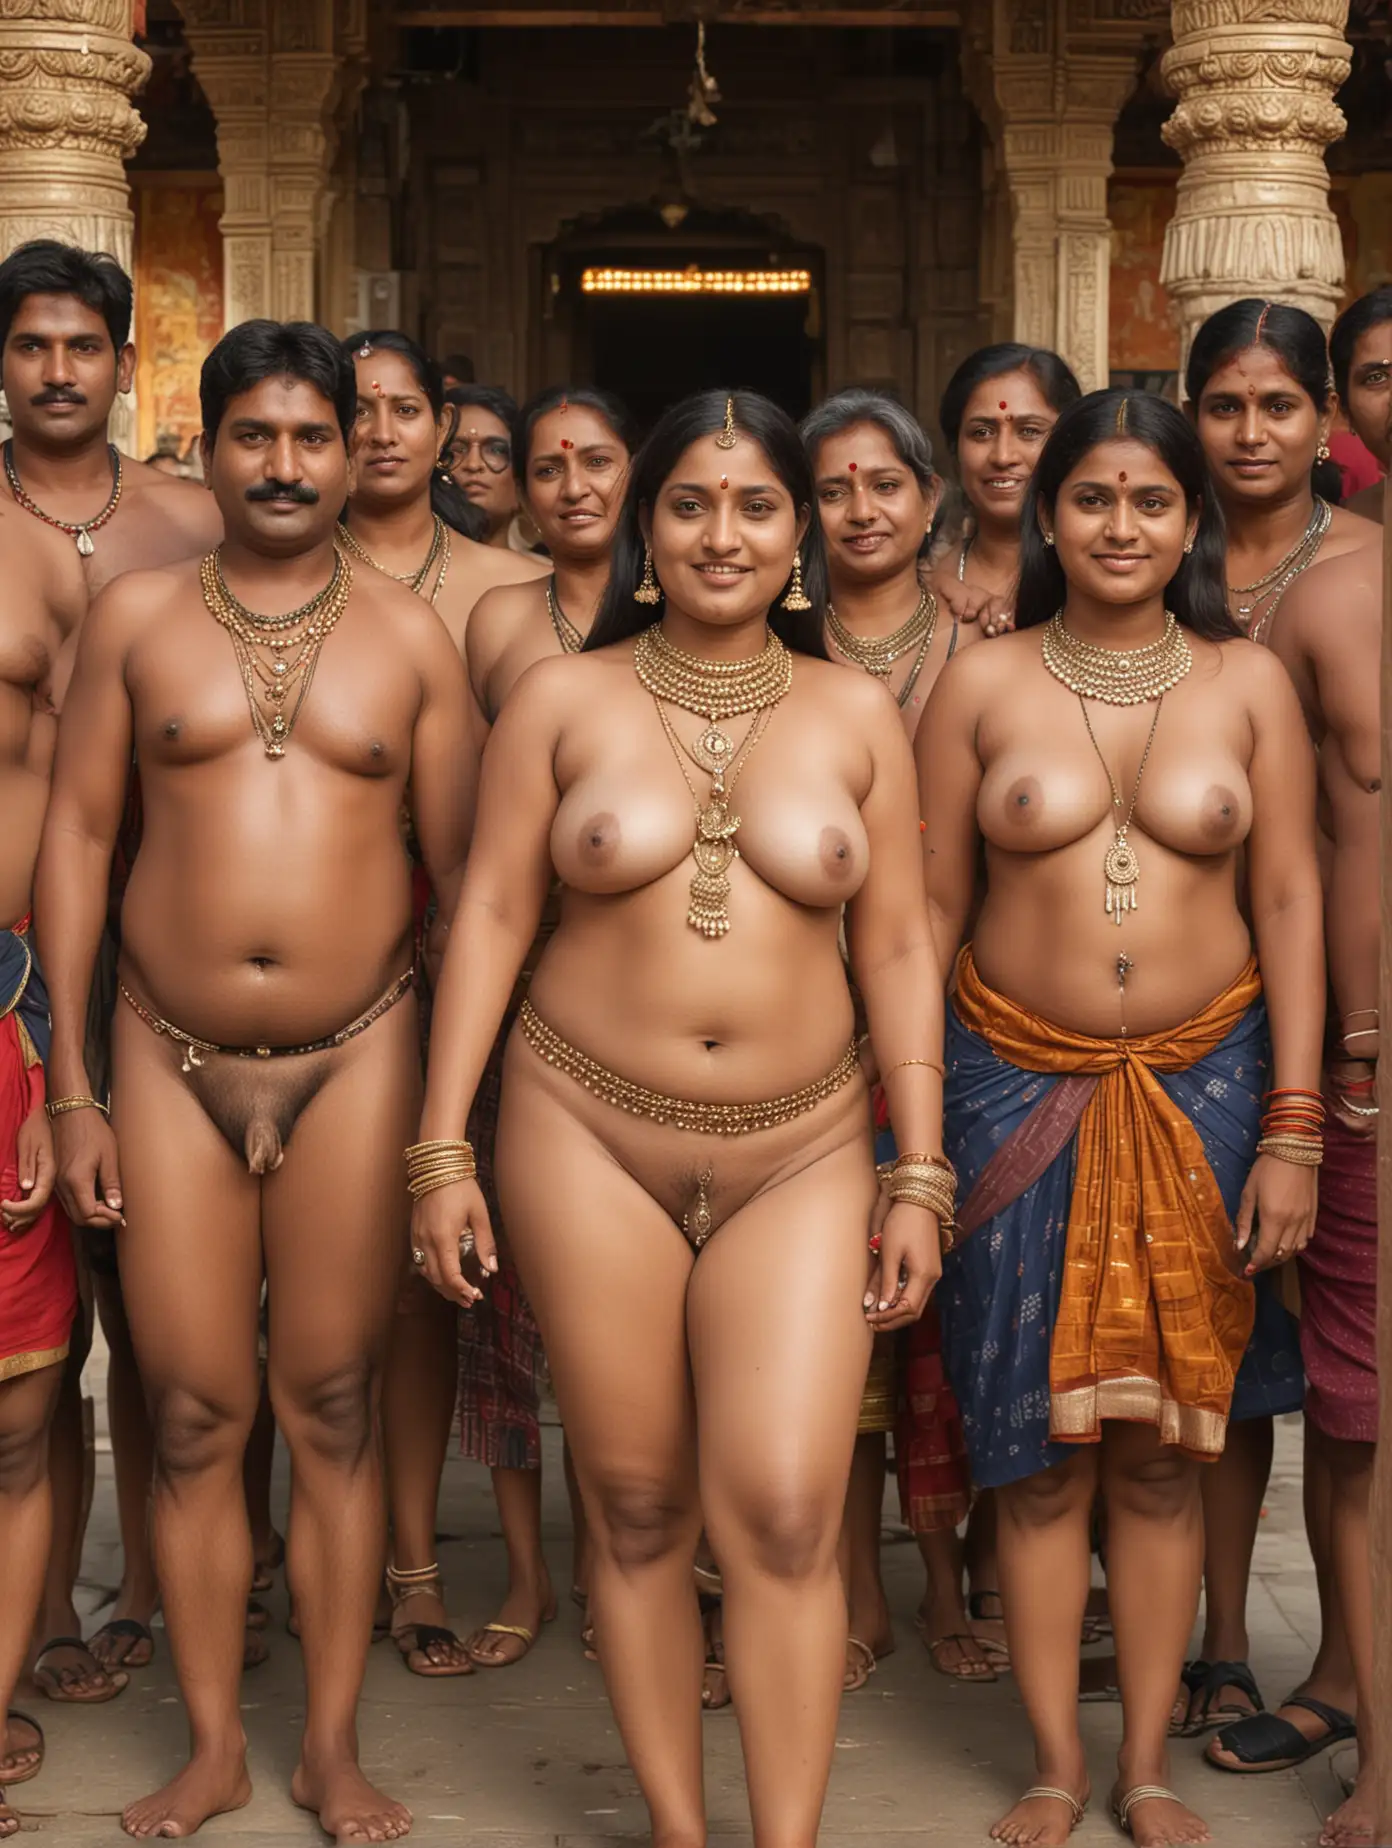 Indian mature mother, chubby and naked, adorned with ornaments, nose ring, nipple ornaments, and waist chain. Also, a south Indian daughter, naked with slim body, next to the mother. Surrounded by brothers and fathers. In a temple.